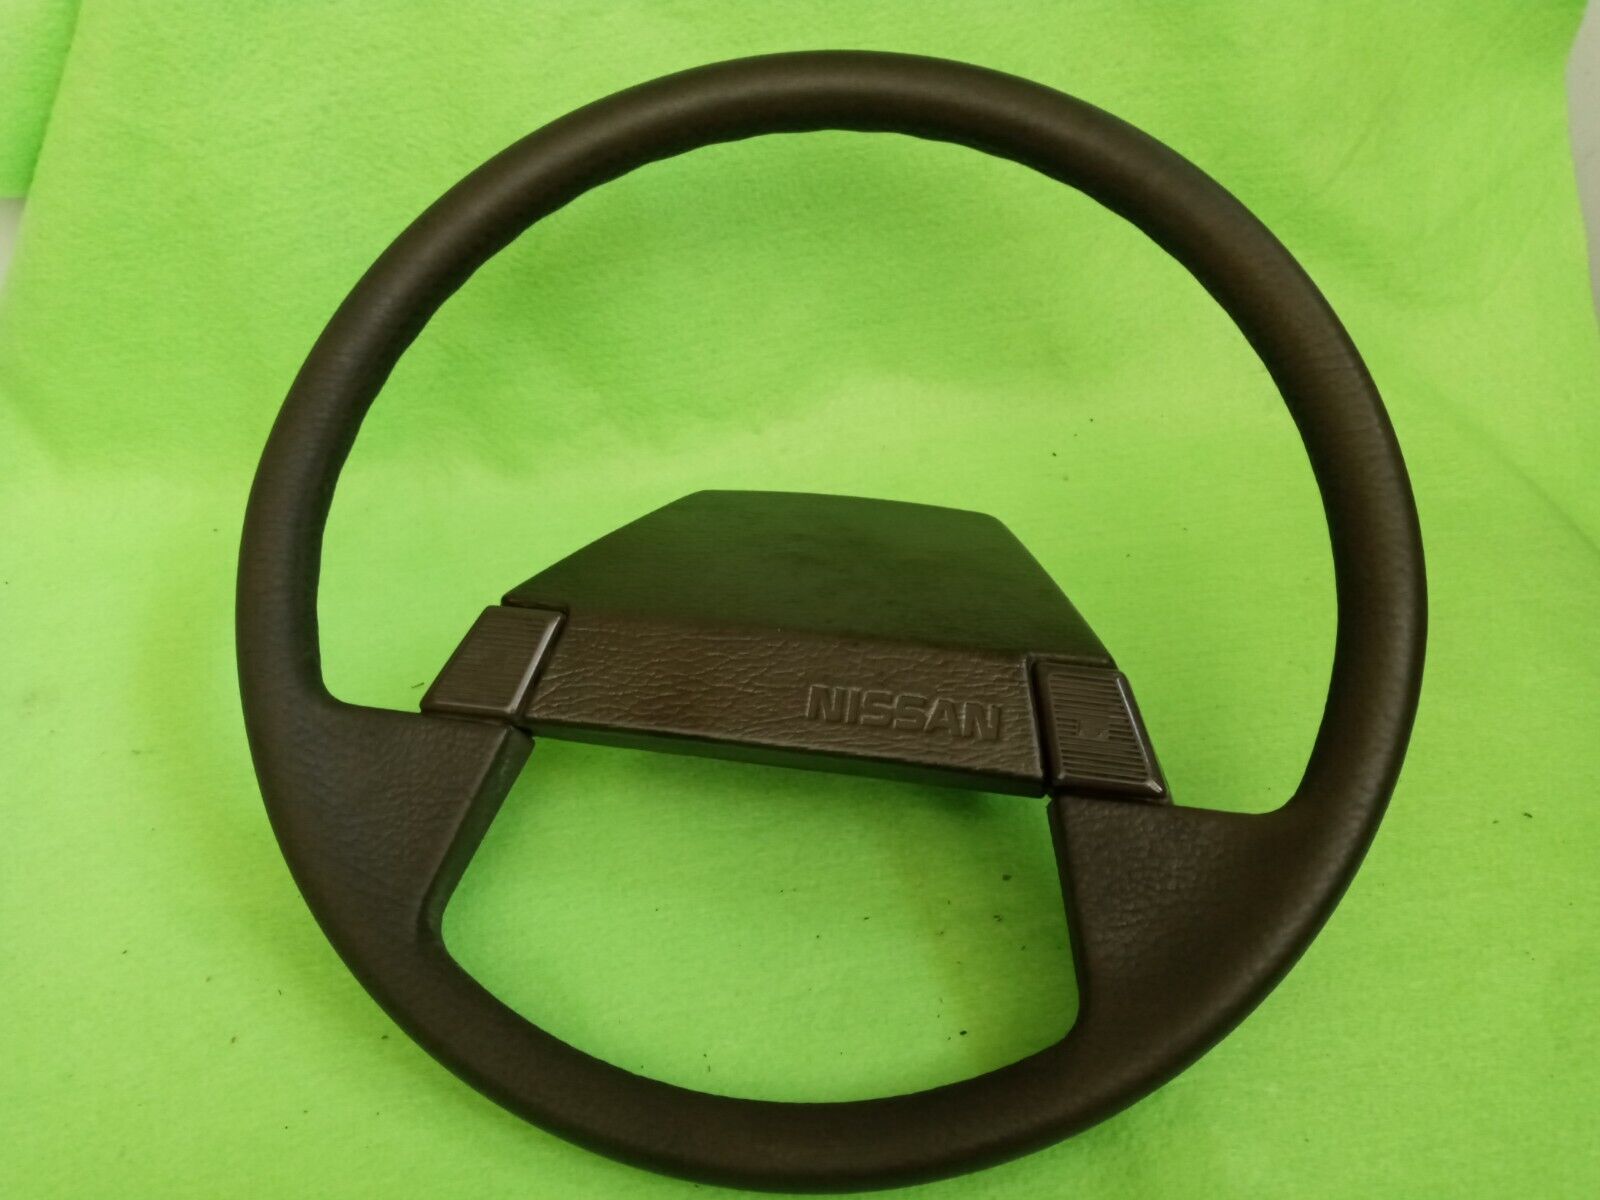 87 NISSAN STANZA STEERING WHEEL (may fit others)